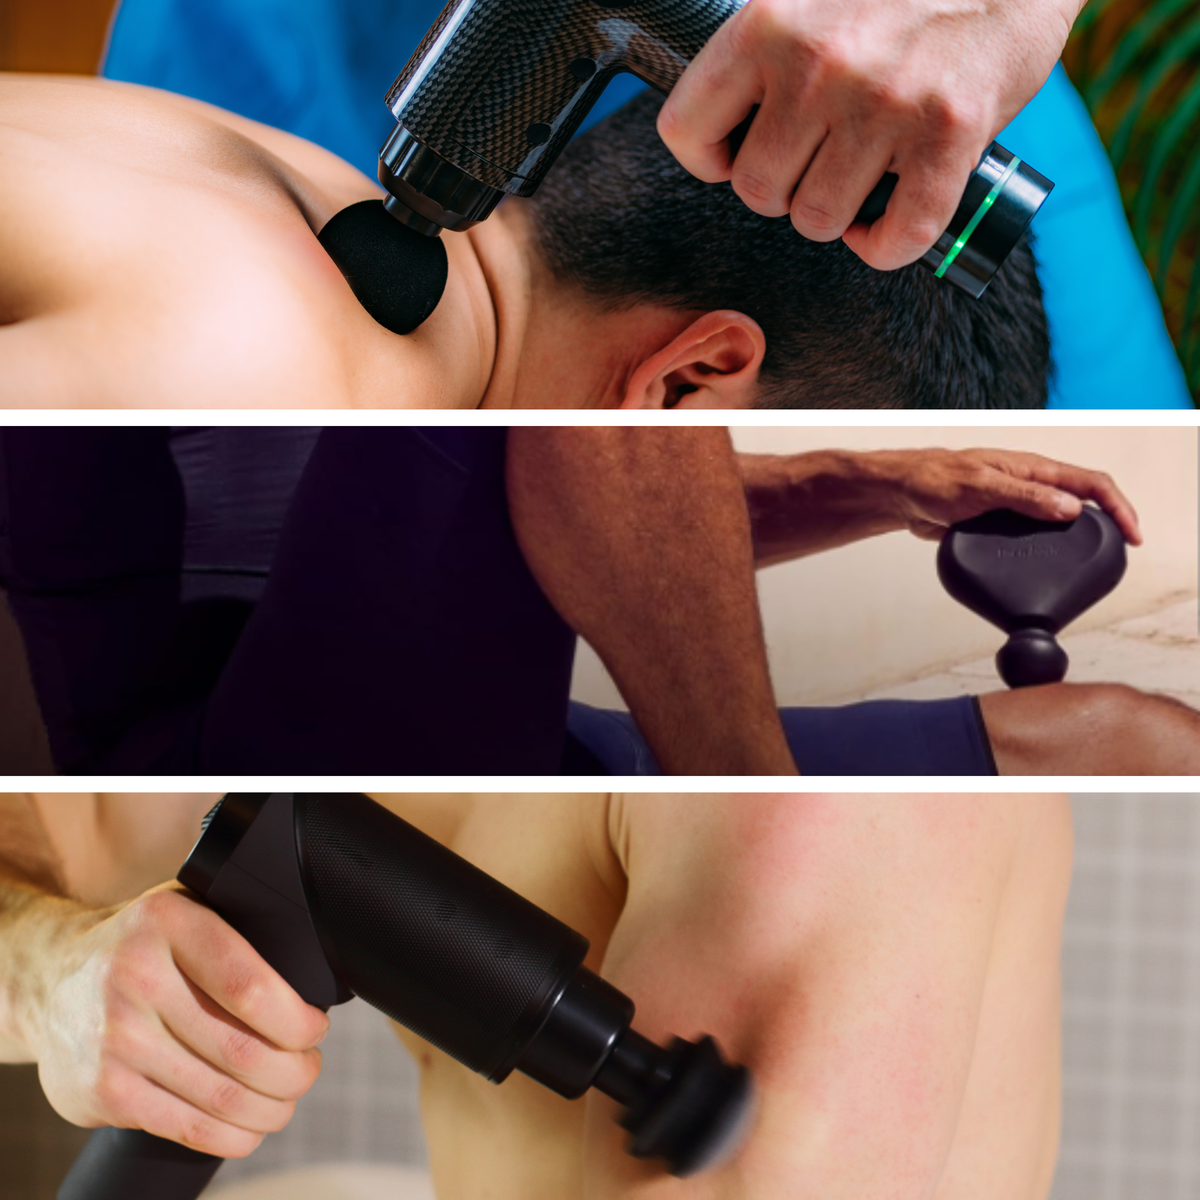 Massage gun being applied to shoulder, thigh and biceps